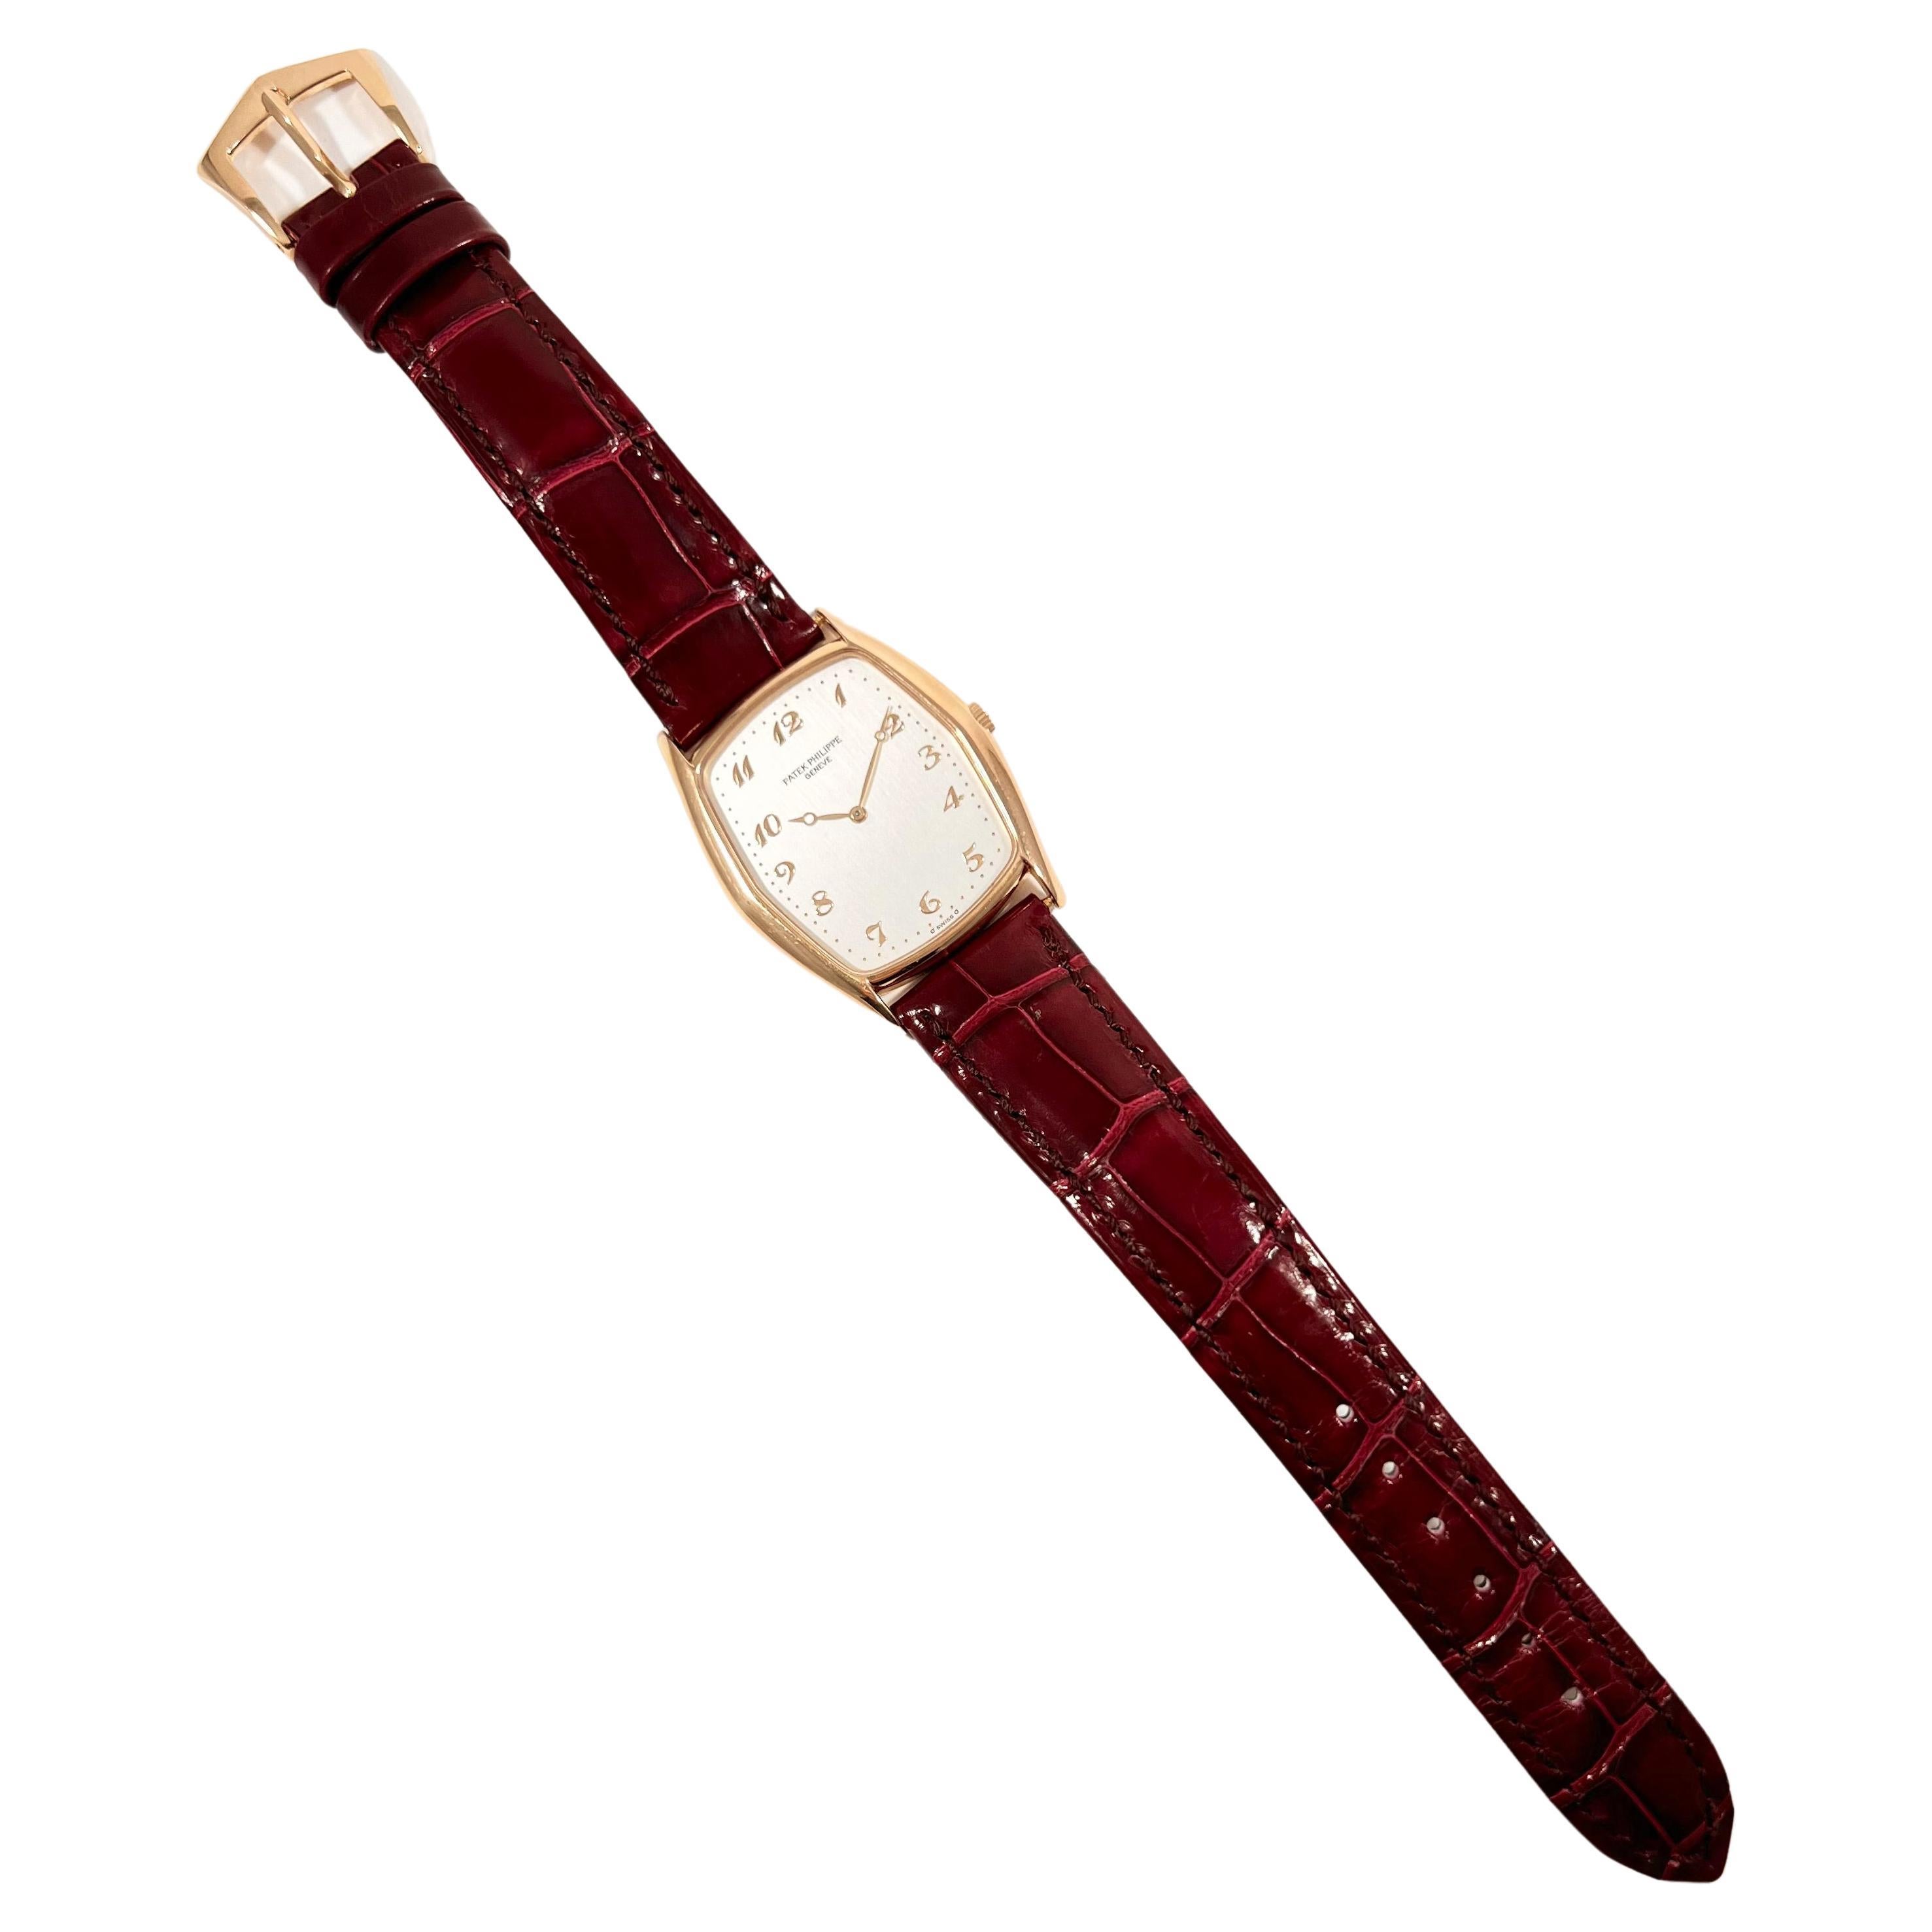 Pre-owned Patek Philippe Gondolo wristwatch (ref. 3842R), featuring a manual-winding movement; silvered dial with applied Arabic numerals; and 29mm, 18k rose gold case on a burgundy-red alligator strap secured by the Patek 18k rose gold ardillon